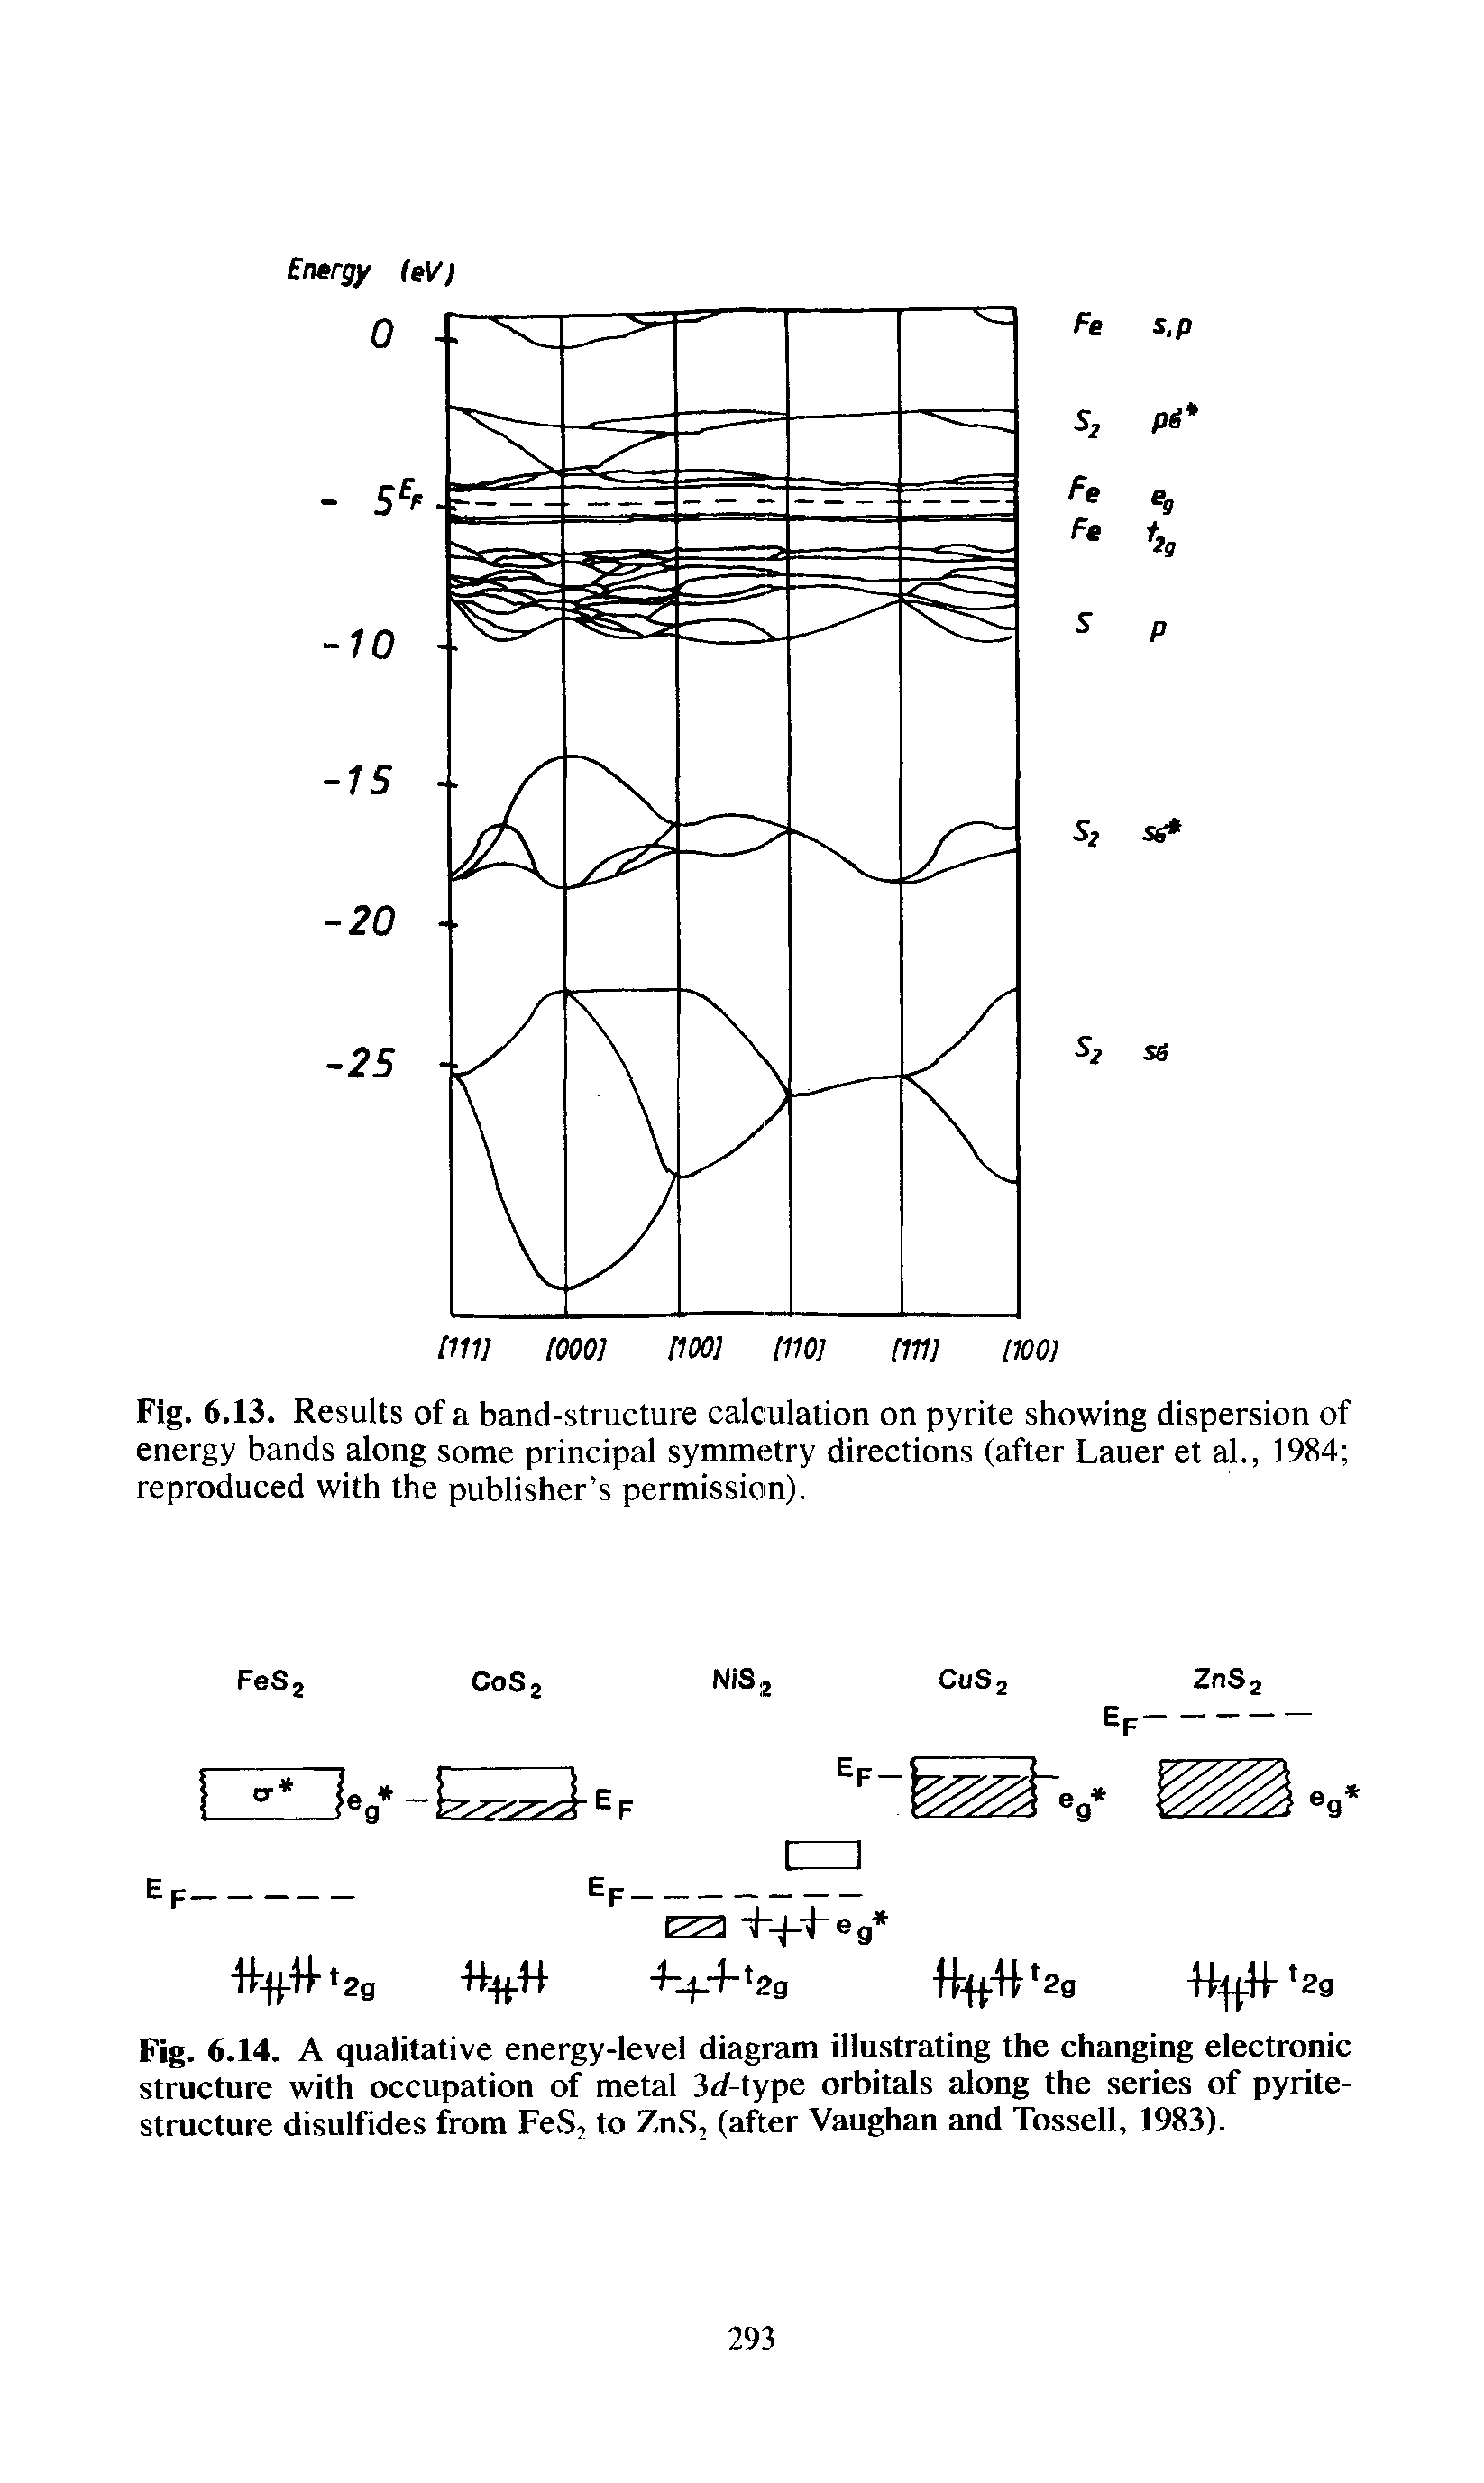 Fig. 6.13. Results of a band-structure calculation on pyrite showing dispersion of energy bands along some principal symmetry directions (after Lauer et al., 1984 reproduced with the publisher s permission).